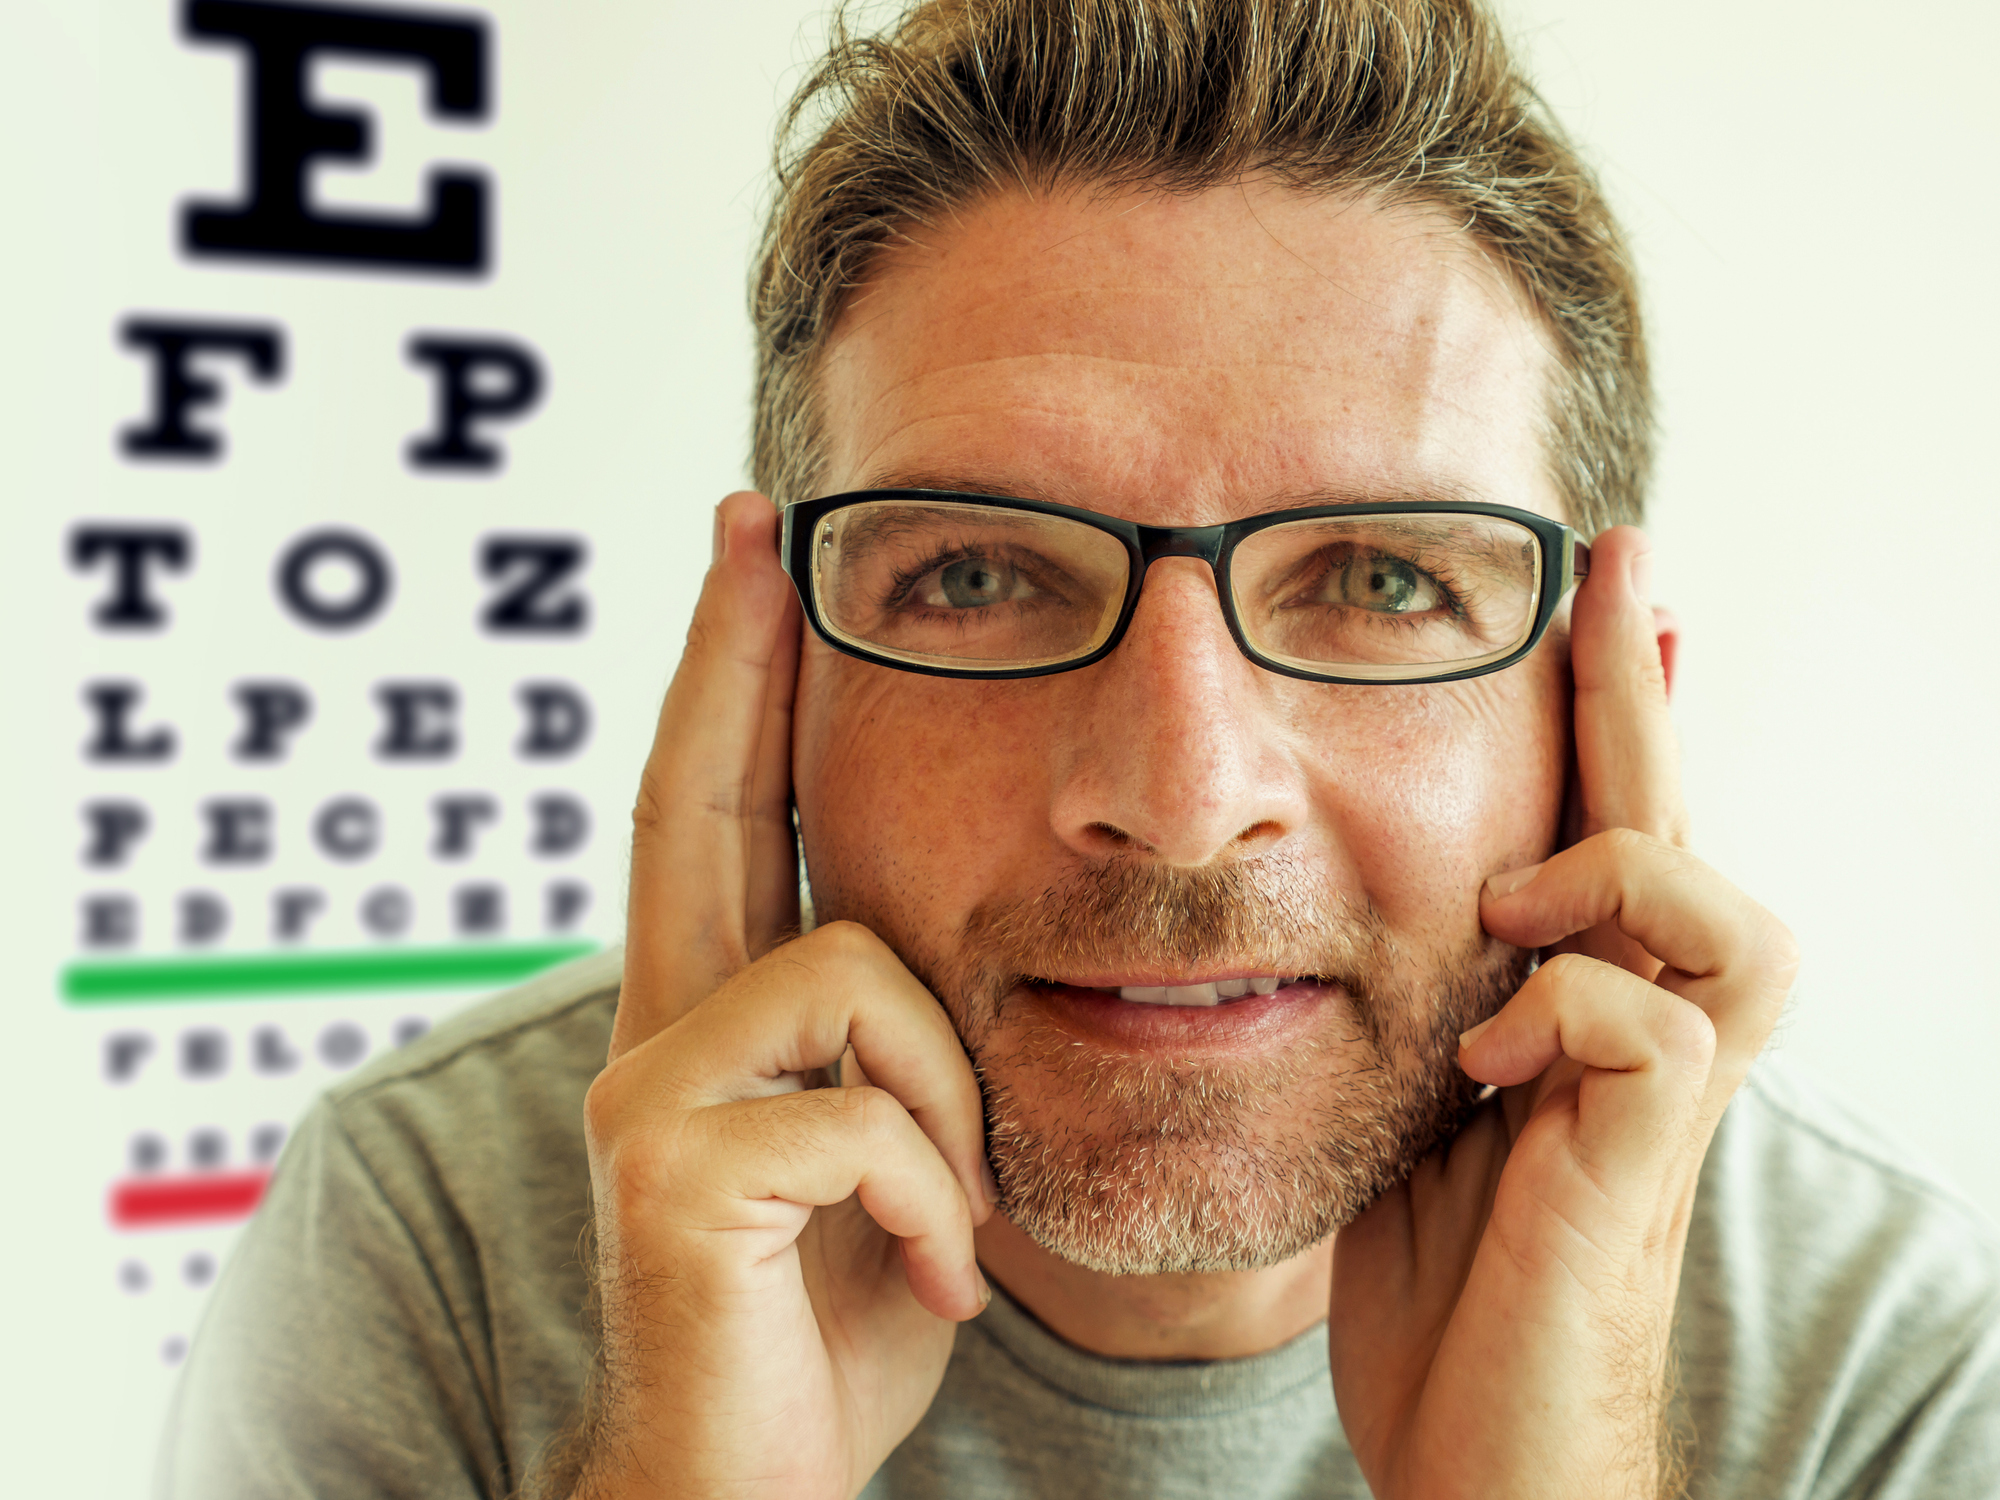 Signs of serious eye conditions and the nutrients to guard them